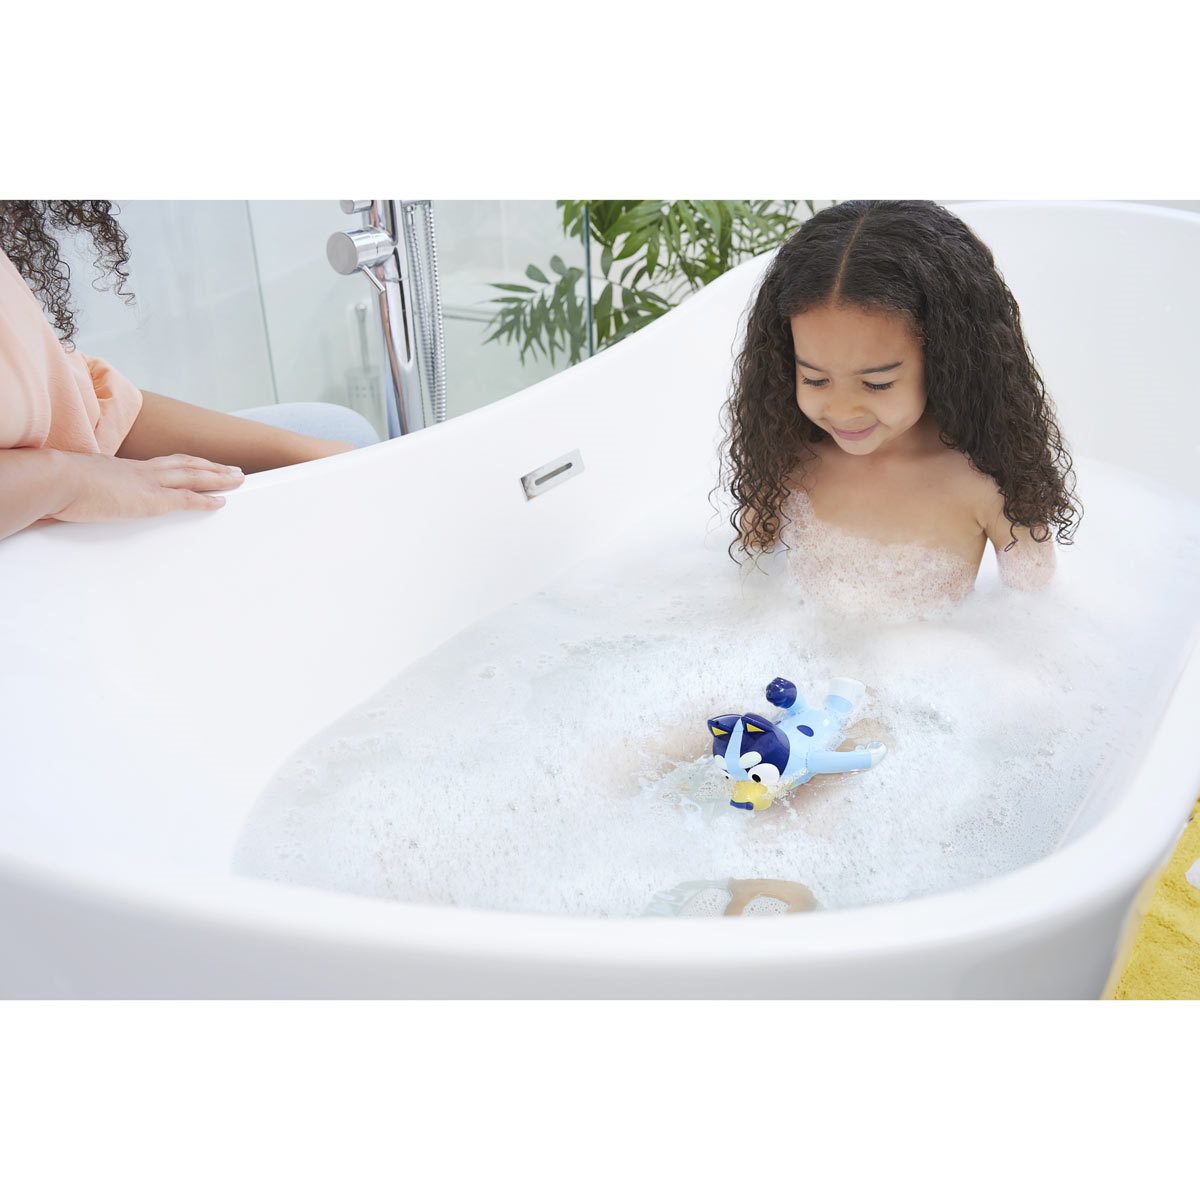 Tomy Toomies Swimming Bluey Bath Toy with Seahorse - Bluey Toys for  Toddlers – Toddler Bath Toys for Tub or Pool That Swims on Back or Front –  Ages 18